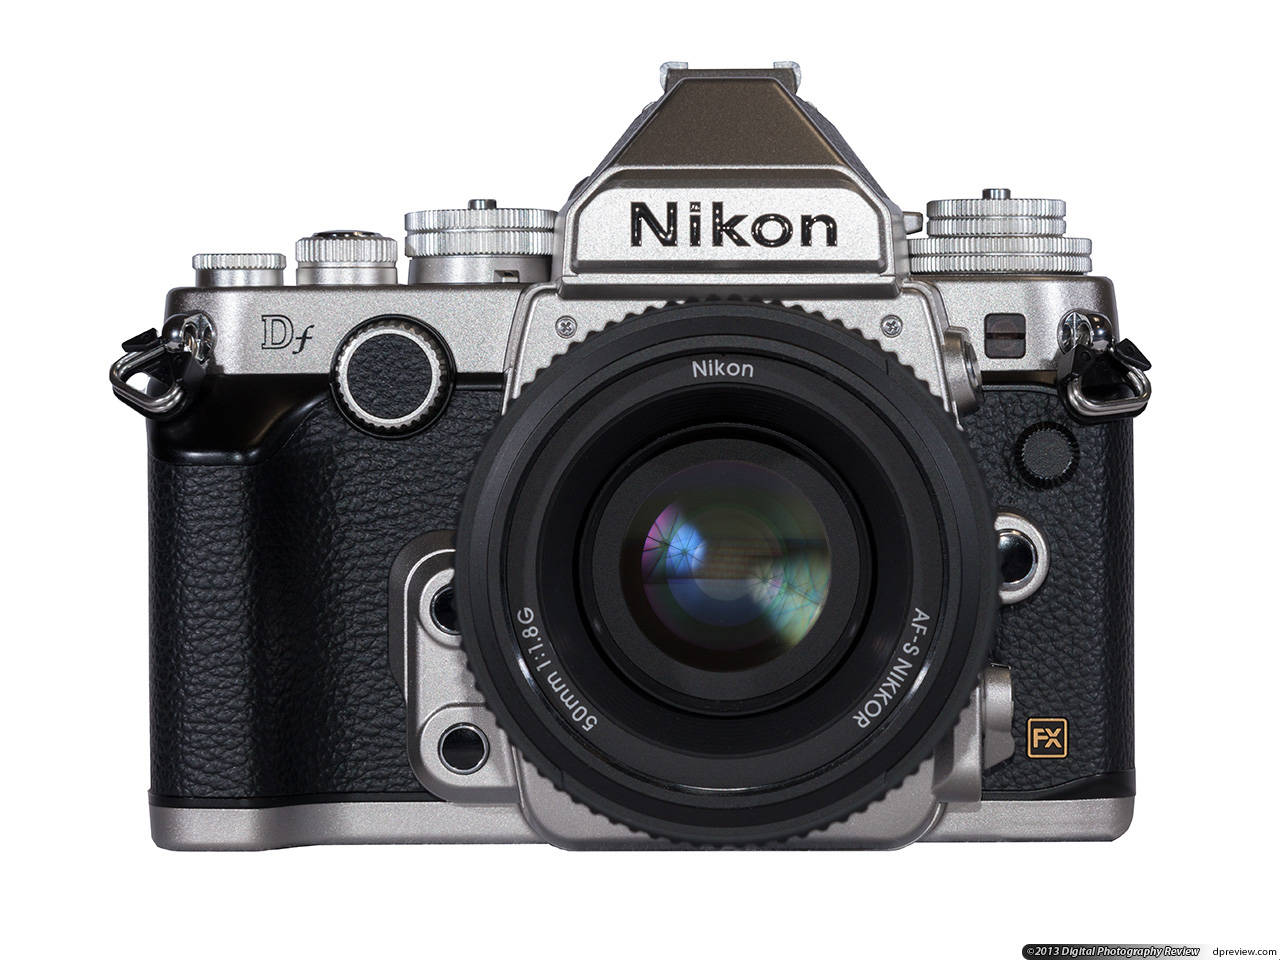 Review based on a production Nikon Df